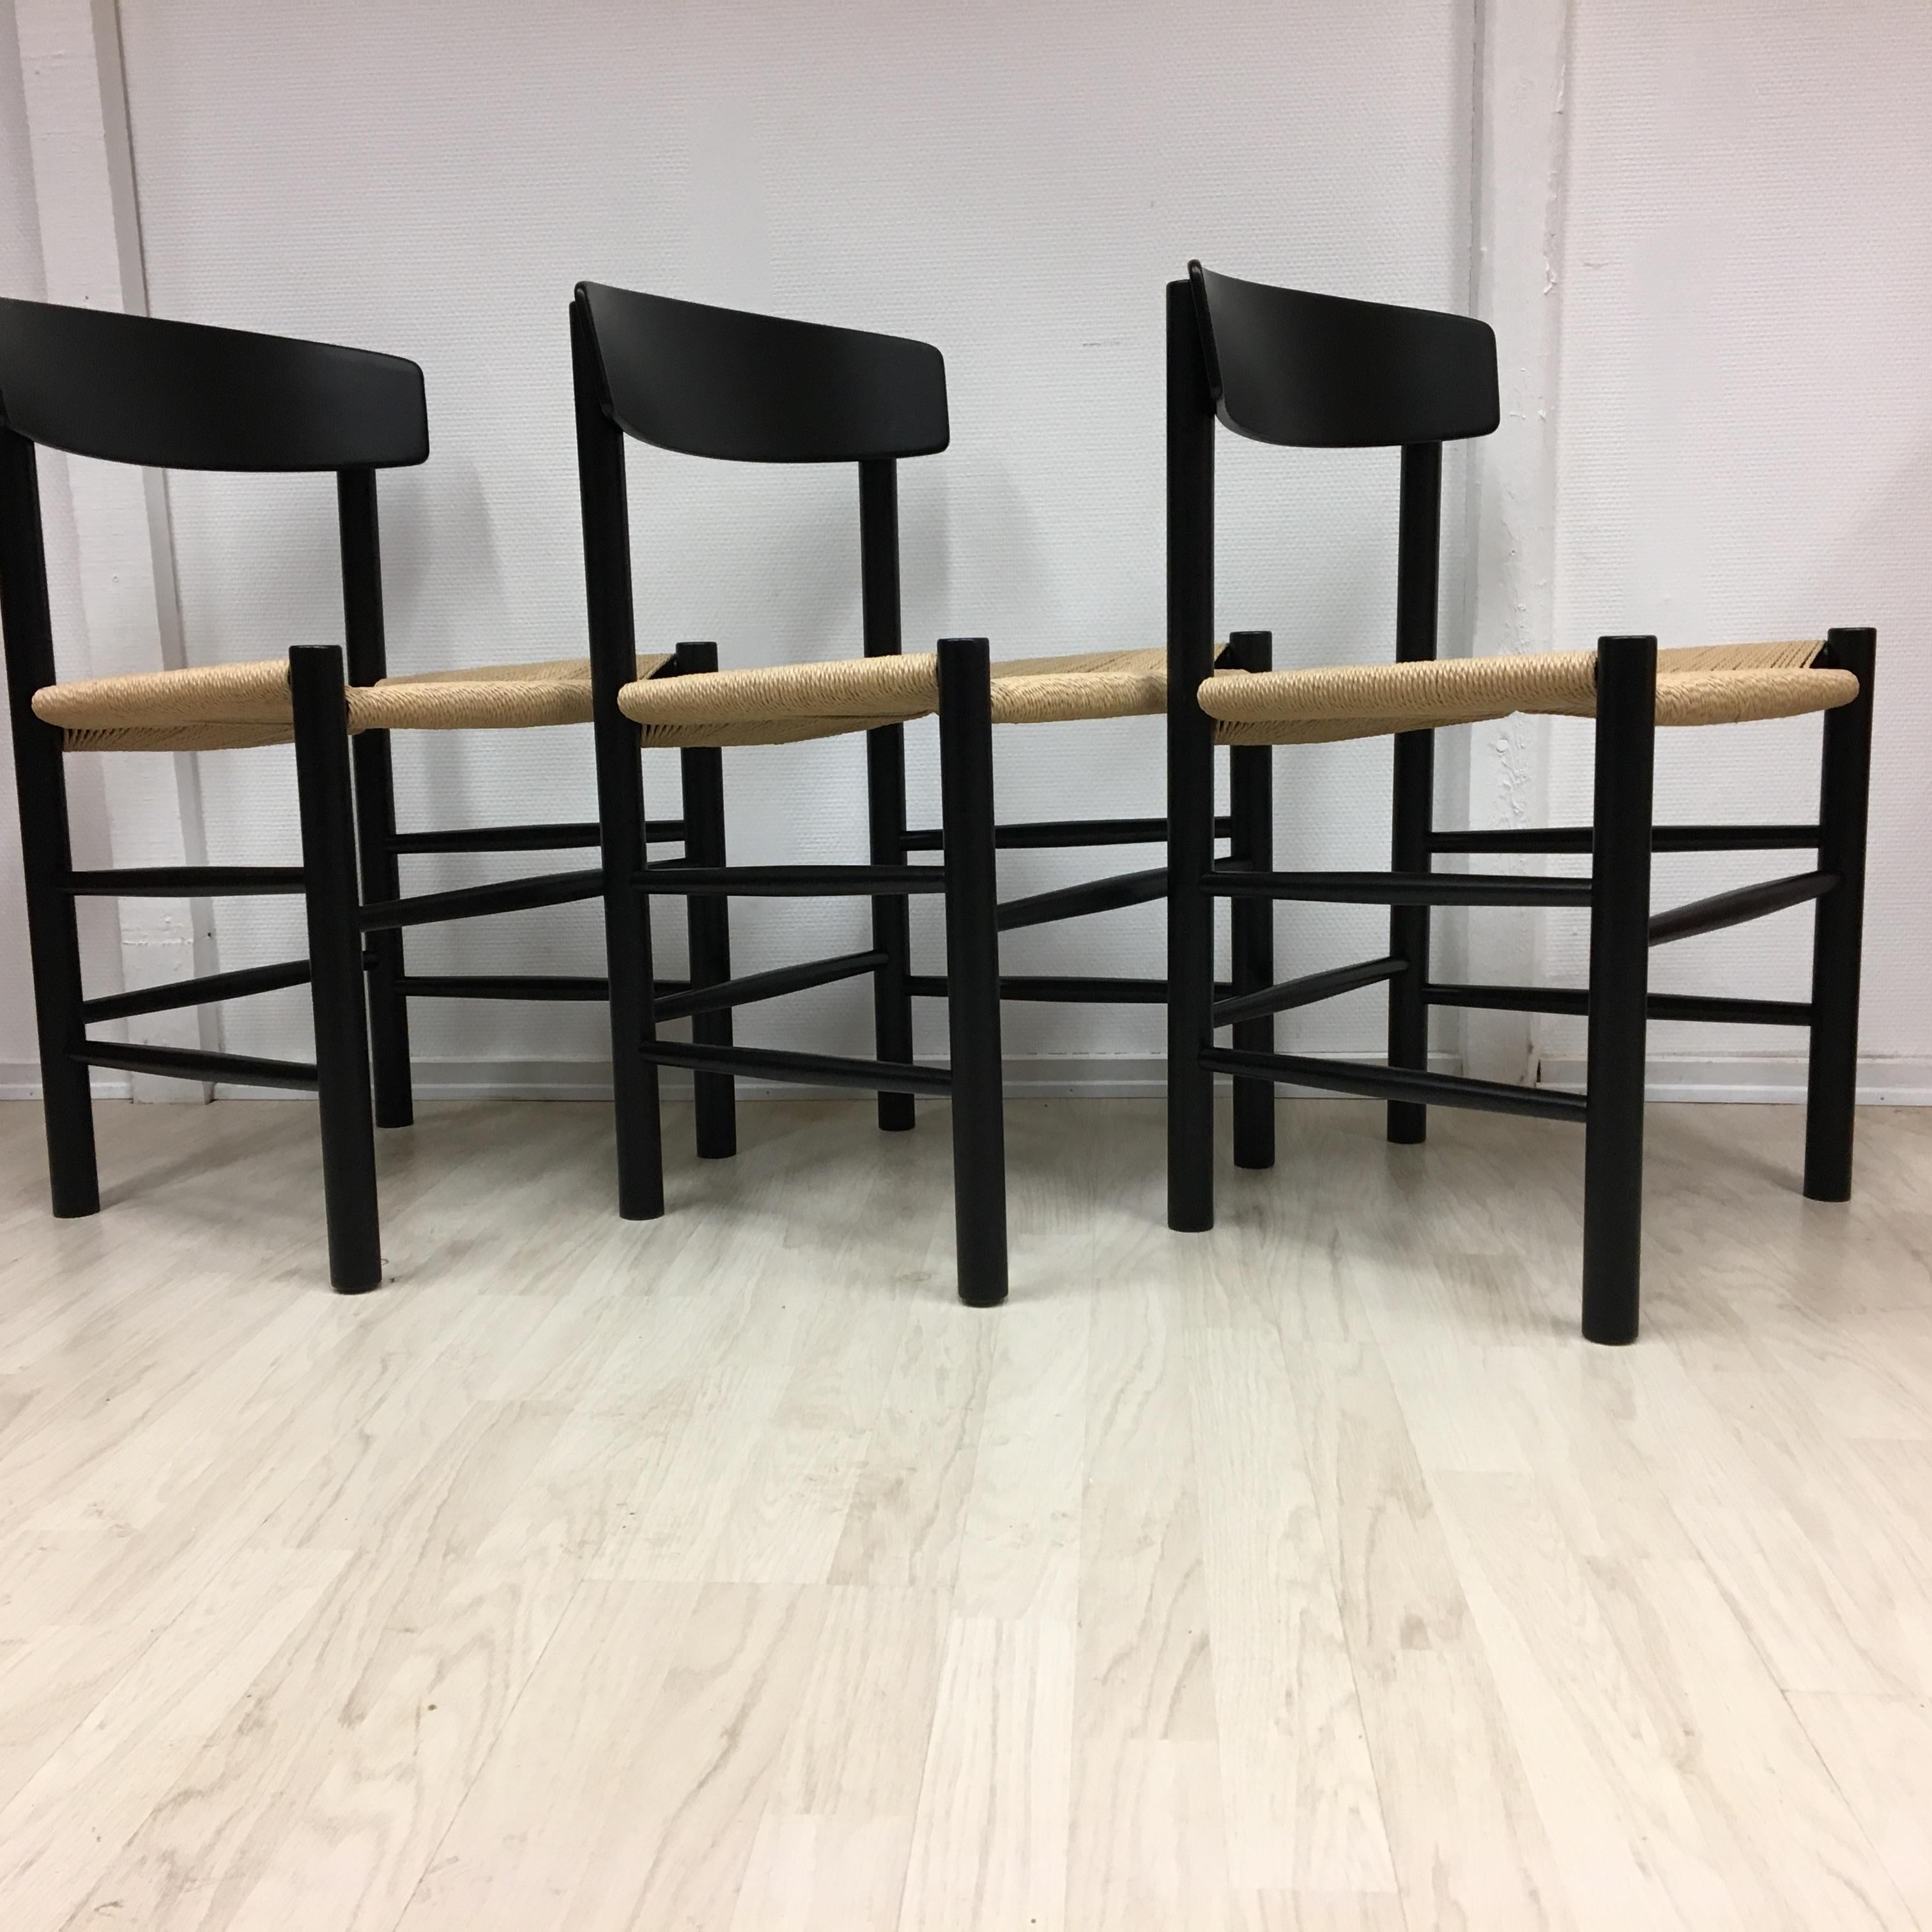 20th Century 3Børge Mogensen 'Folkestole' Dining Chairs J39 Black Lacquer with New Paper Cord